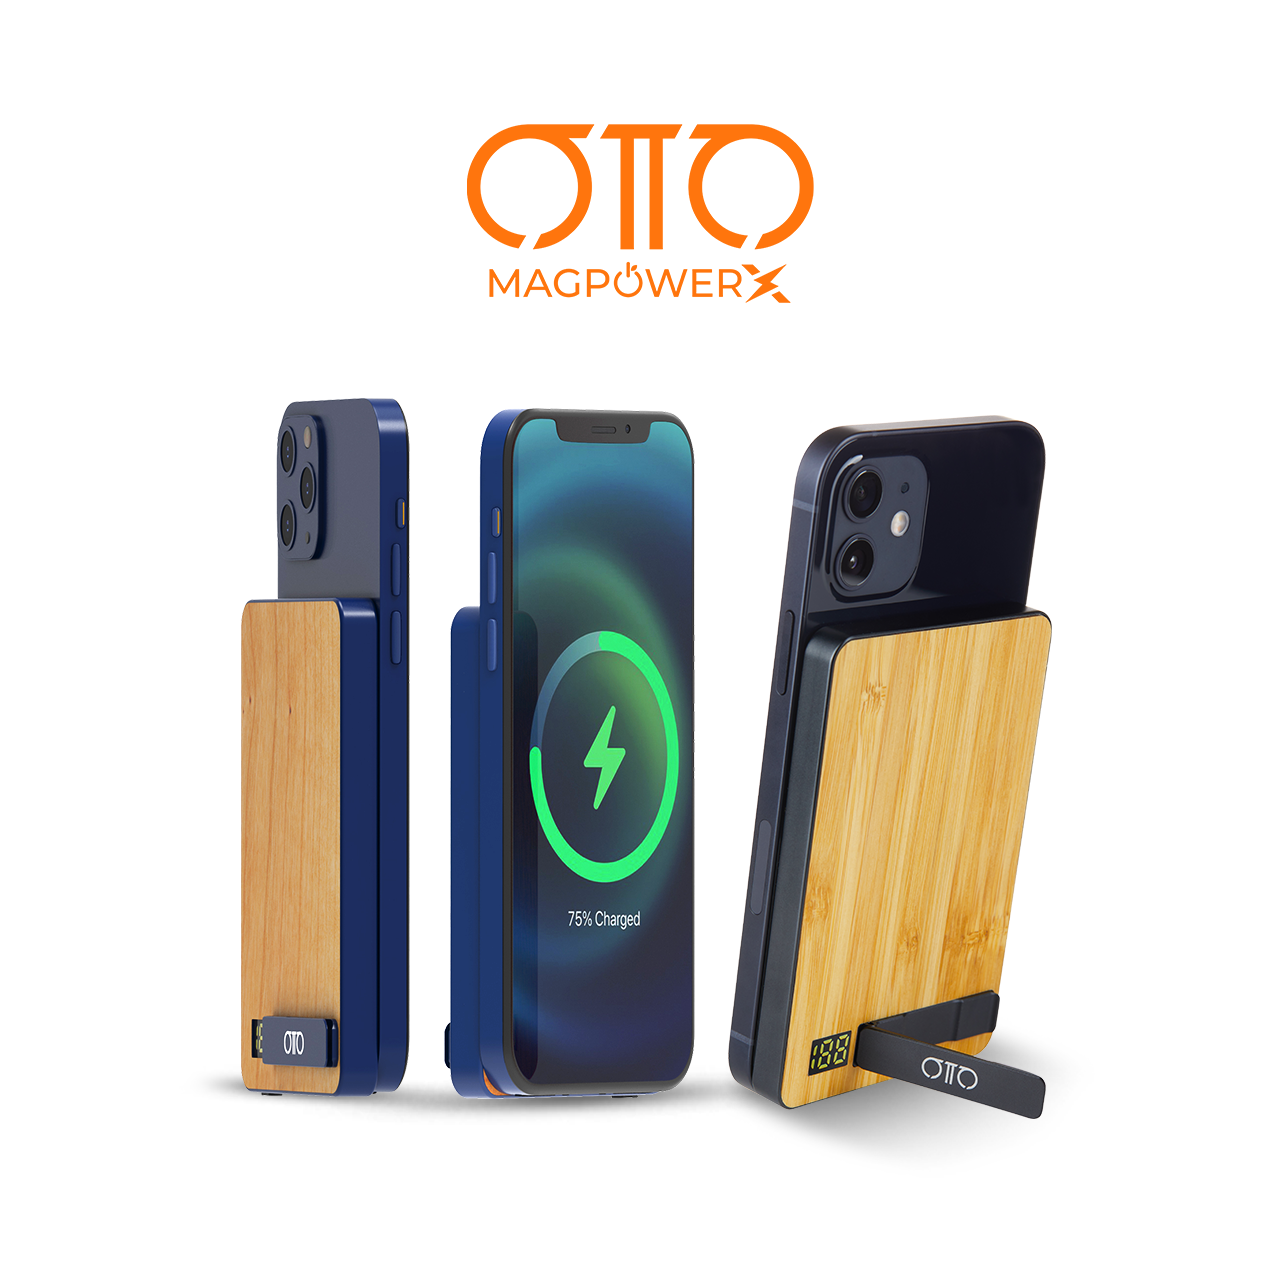 Magpowerx Wireless Charger Power Bank - OTTO Case